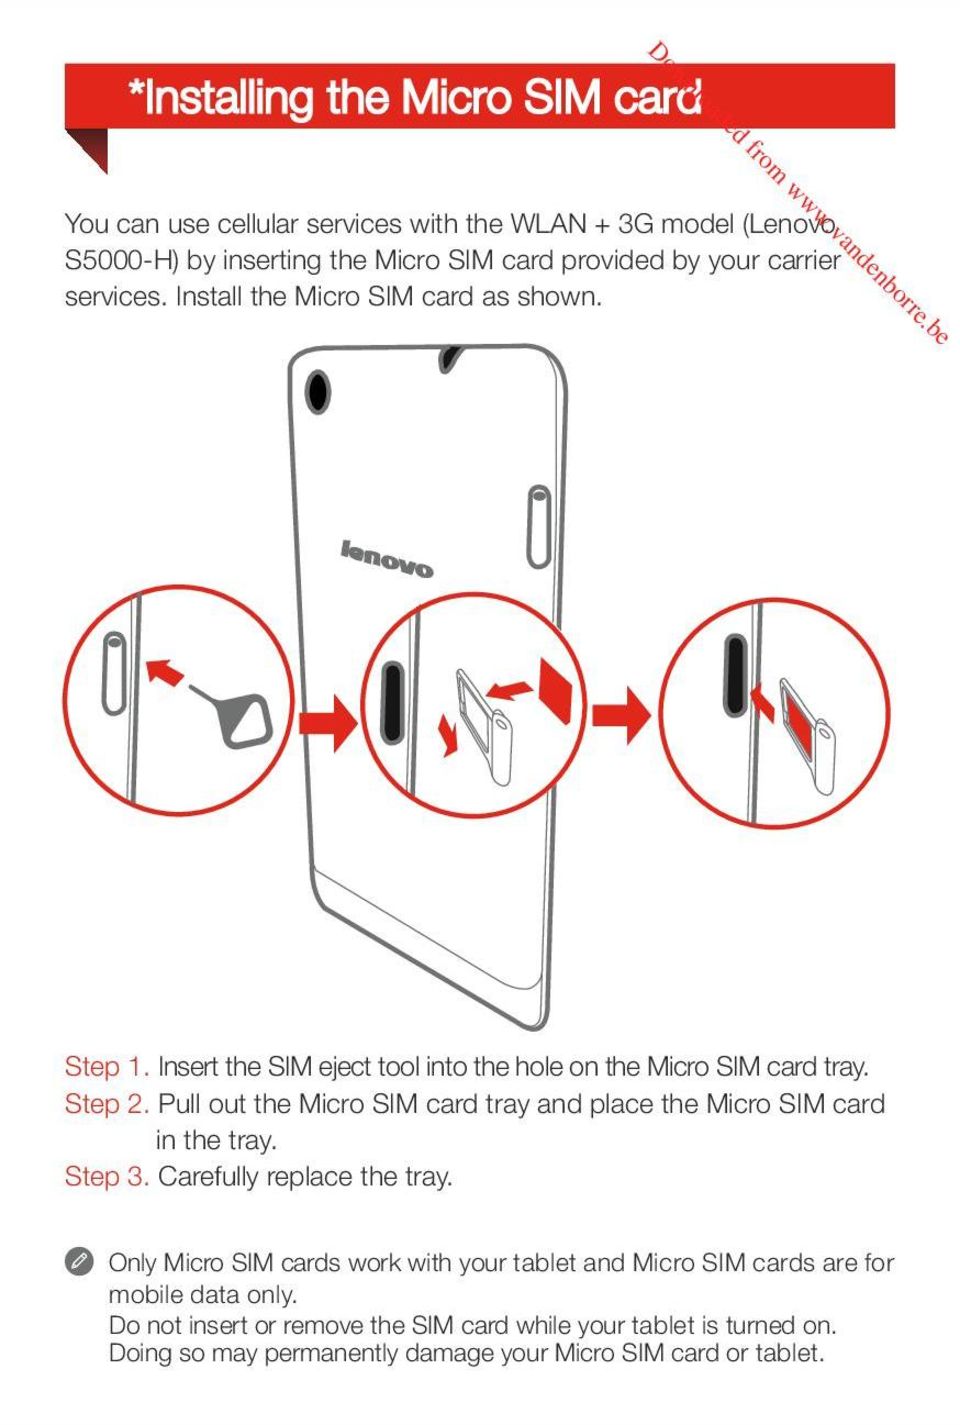 Install the Micro SIM card as shon. Step 1. Insert the SIM eject tool into the hole on the Micro SIM card tray. Step 2.